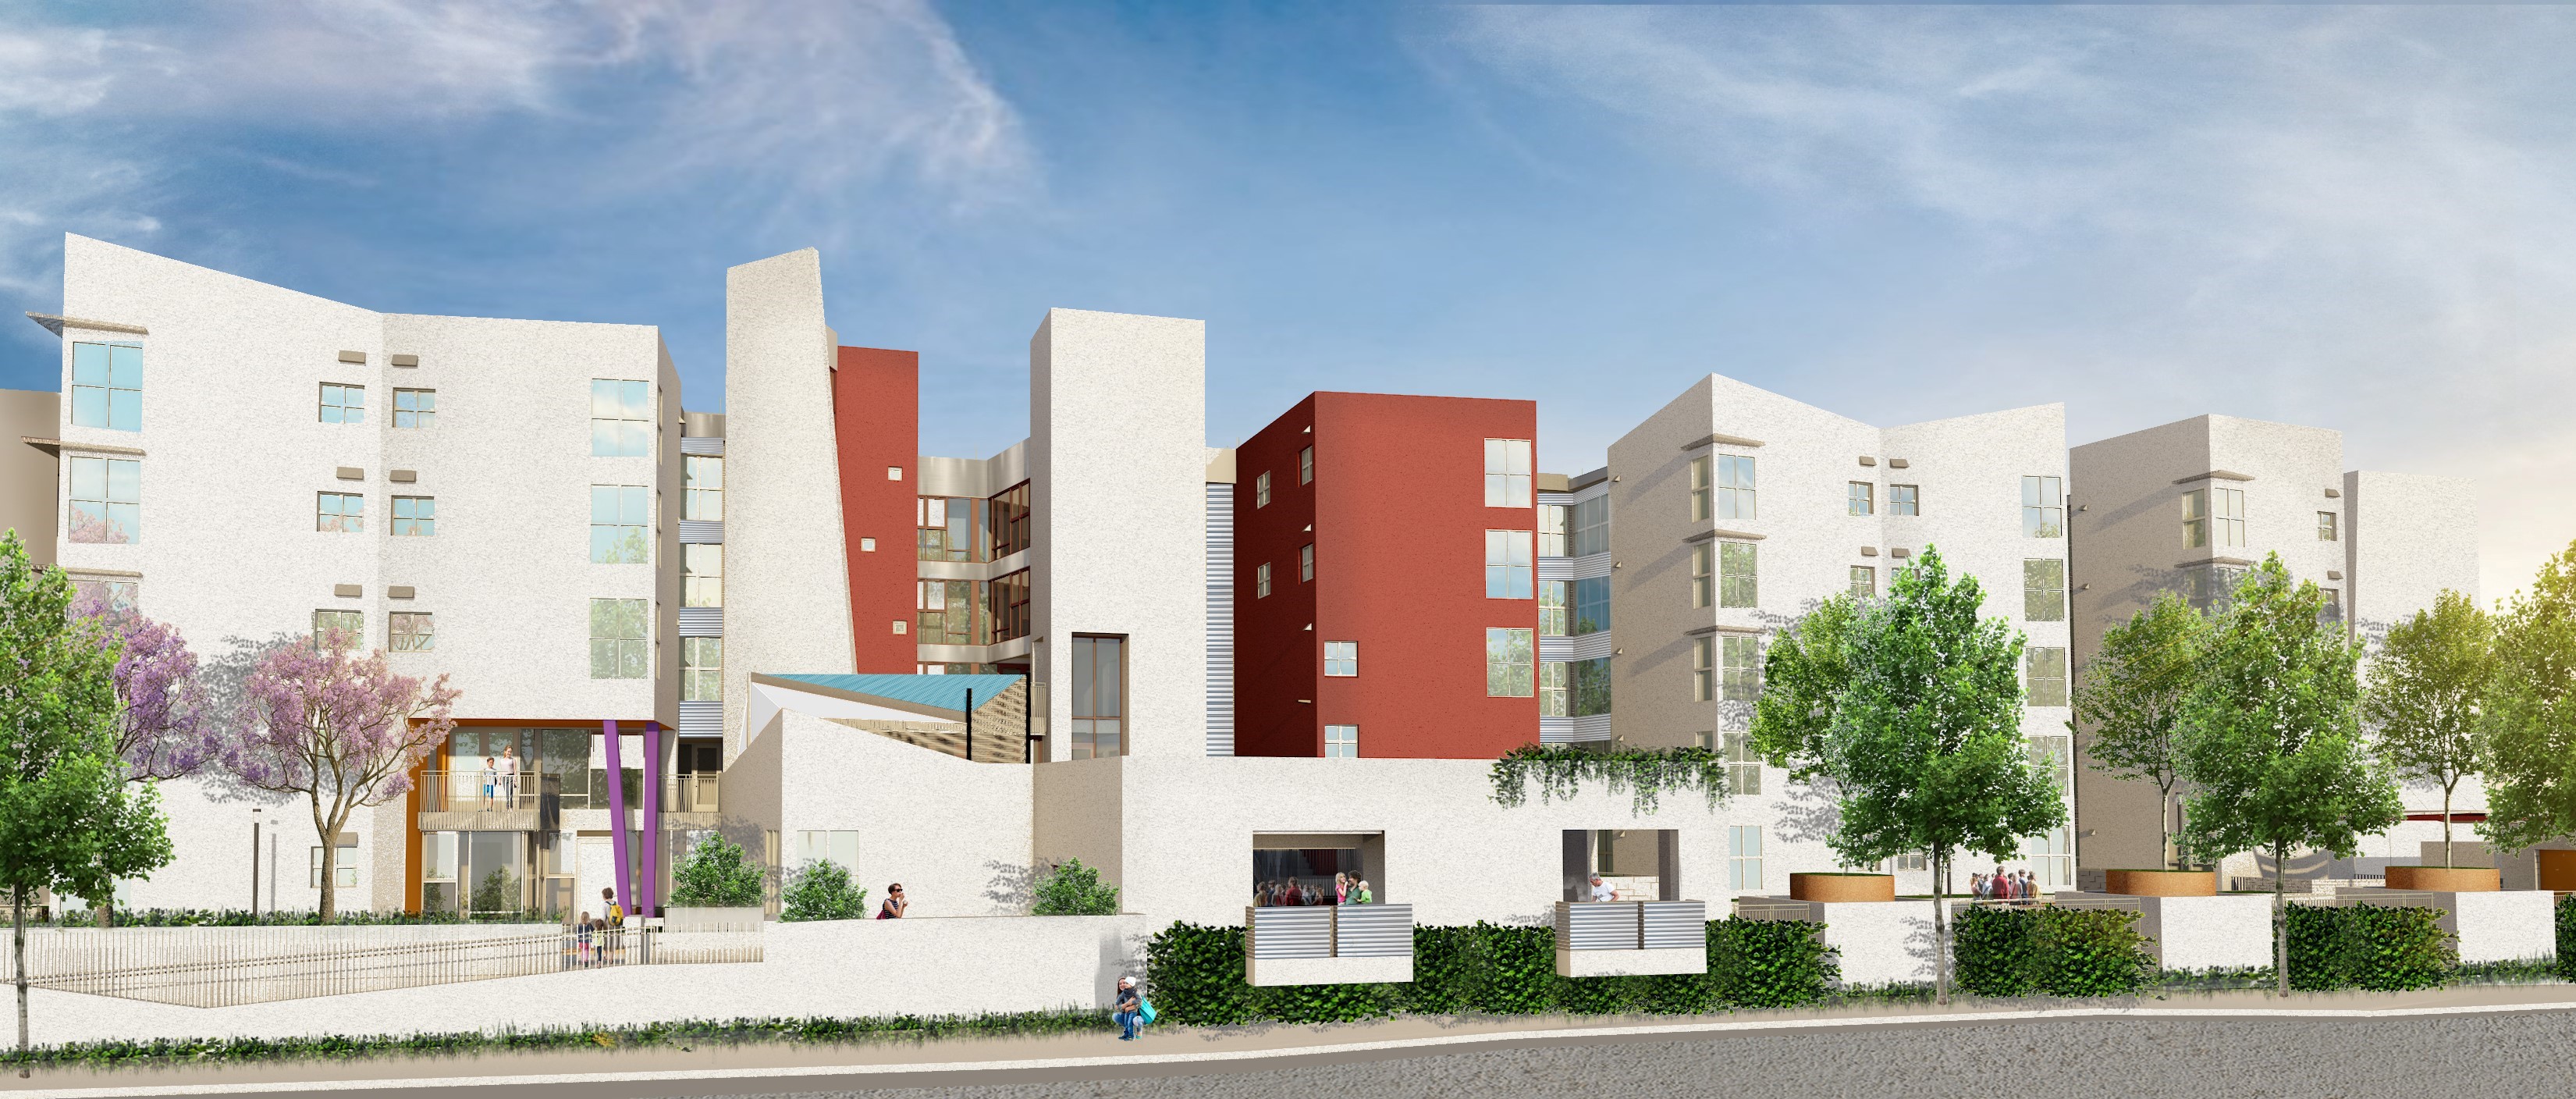 Rendering of the Mid-City family apartments